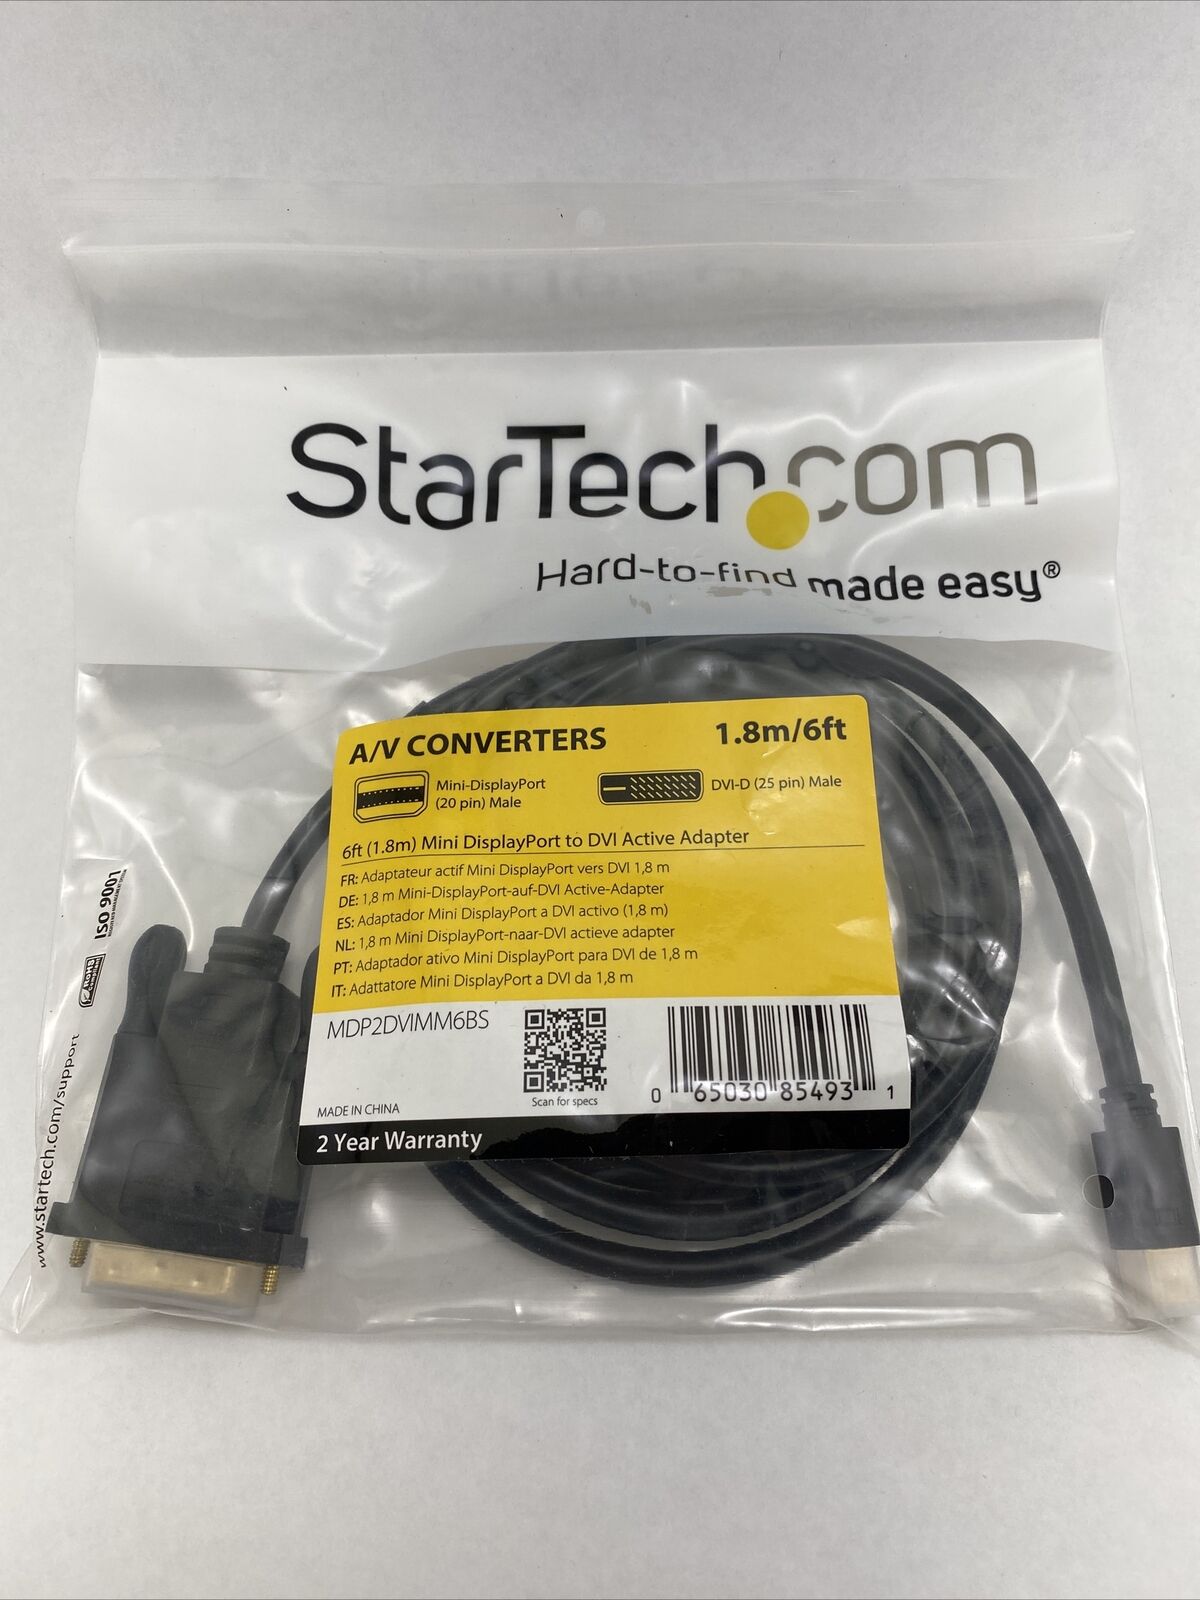 startech.com 6 foot mini display port to DVI active adapter. One Unit